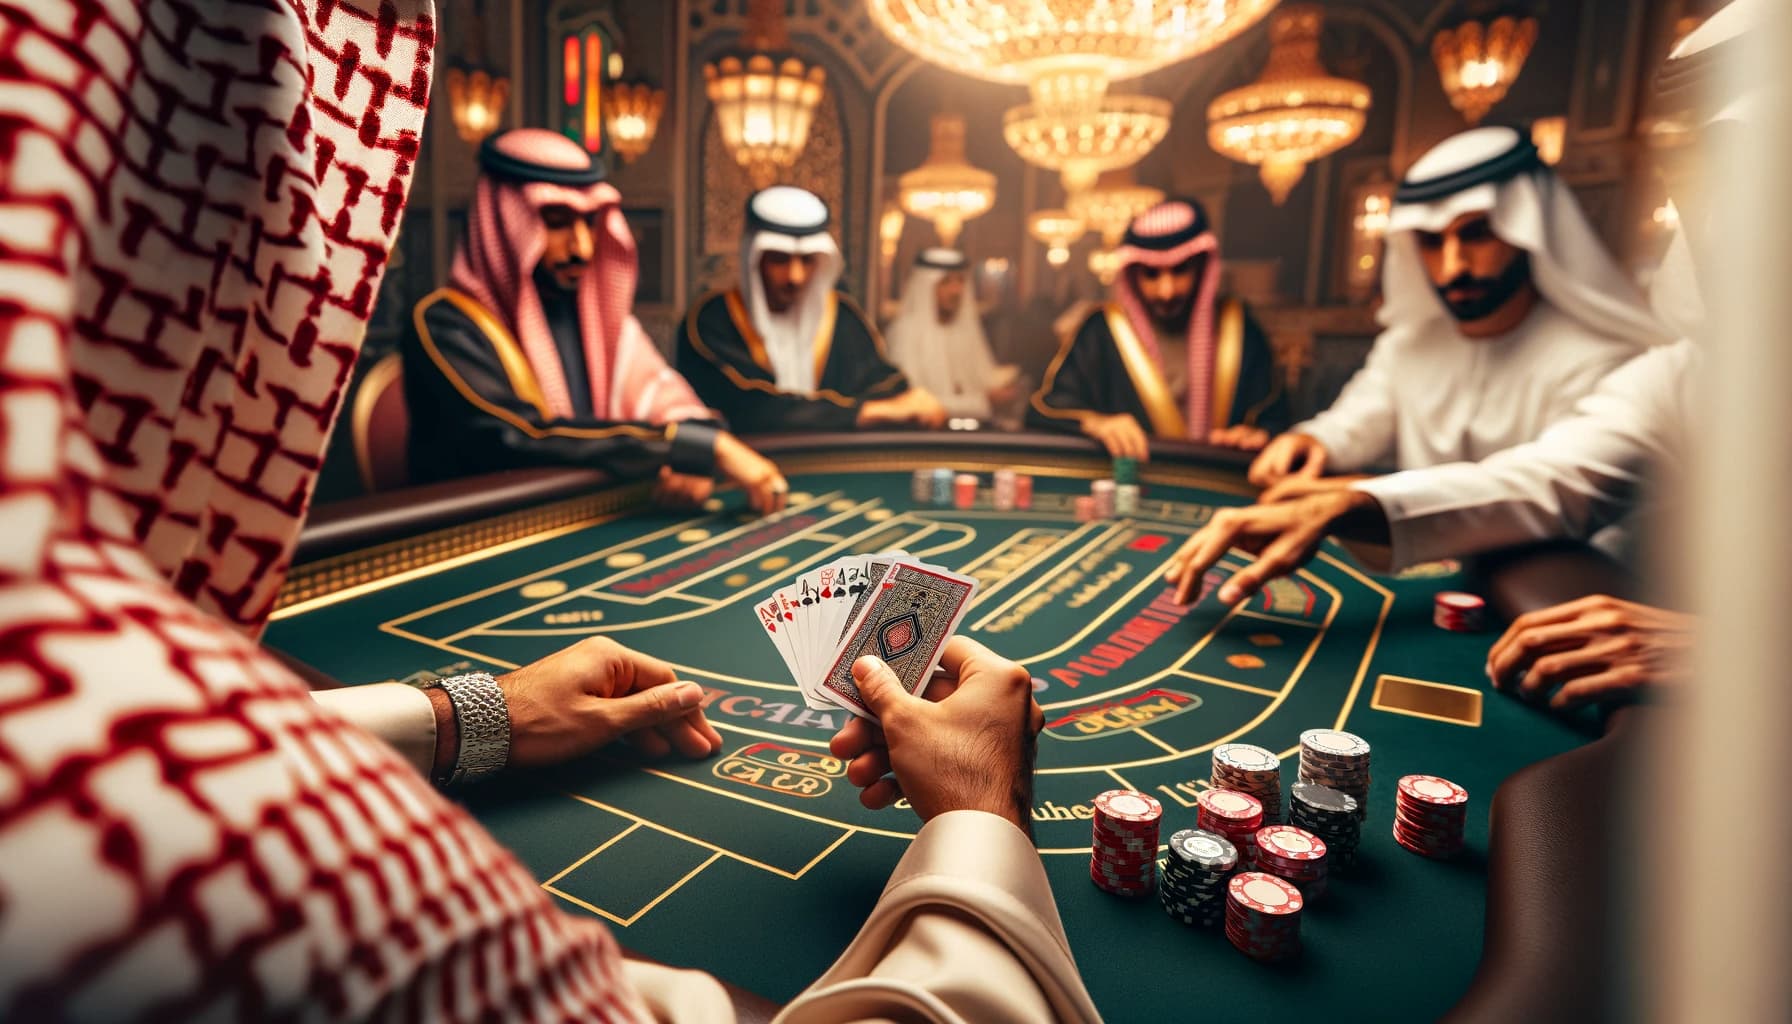 A close-up view of a Baccarat game in an Arabic casino, focusing on the hands of players holding cards and placing bets, with a glimpse of the luxurio